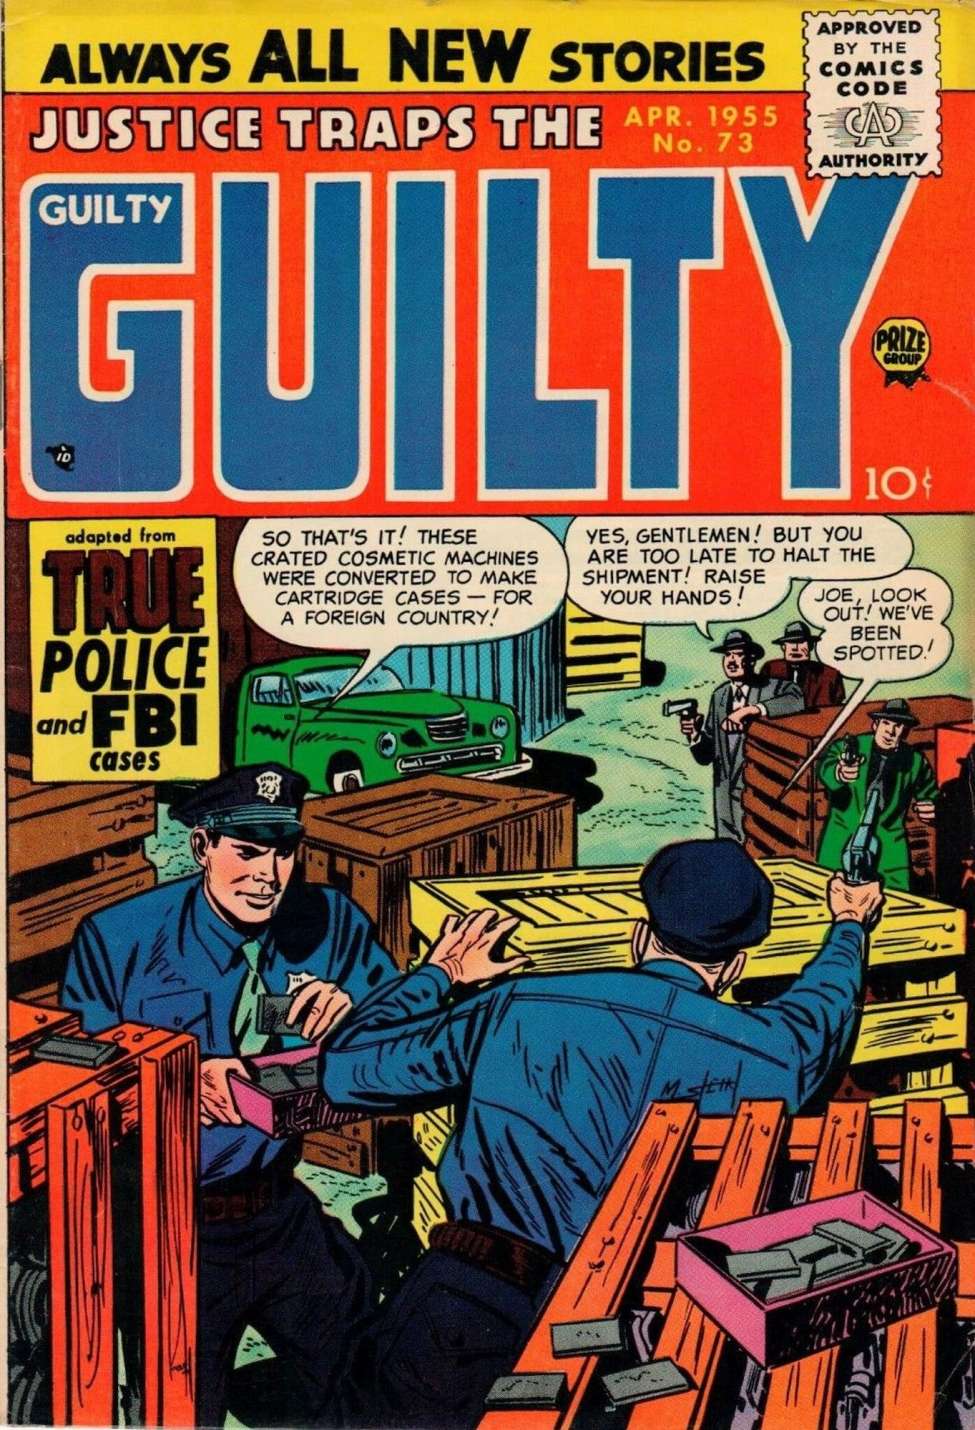 Comic Book Cover For Justice Traps the Guilty 73 - Version 2